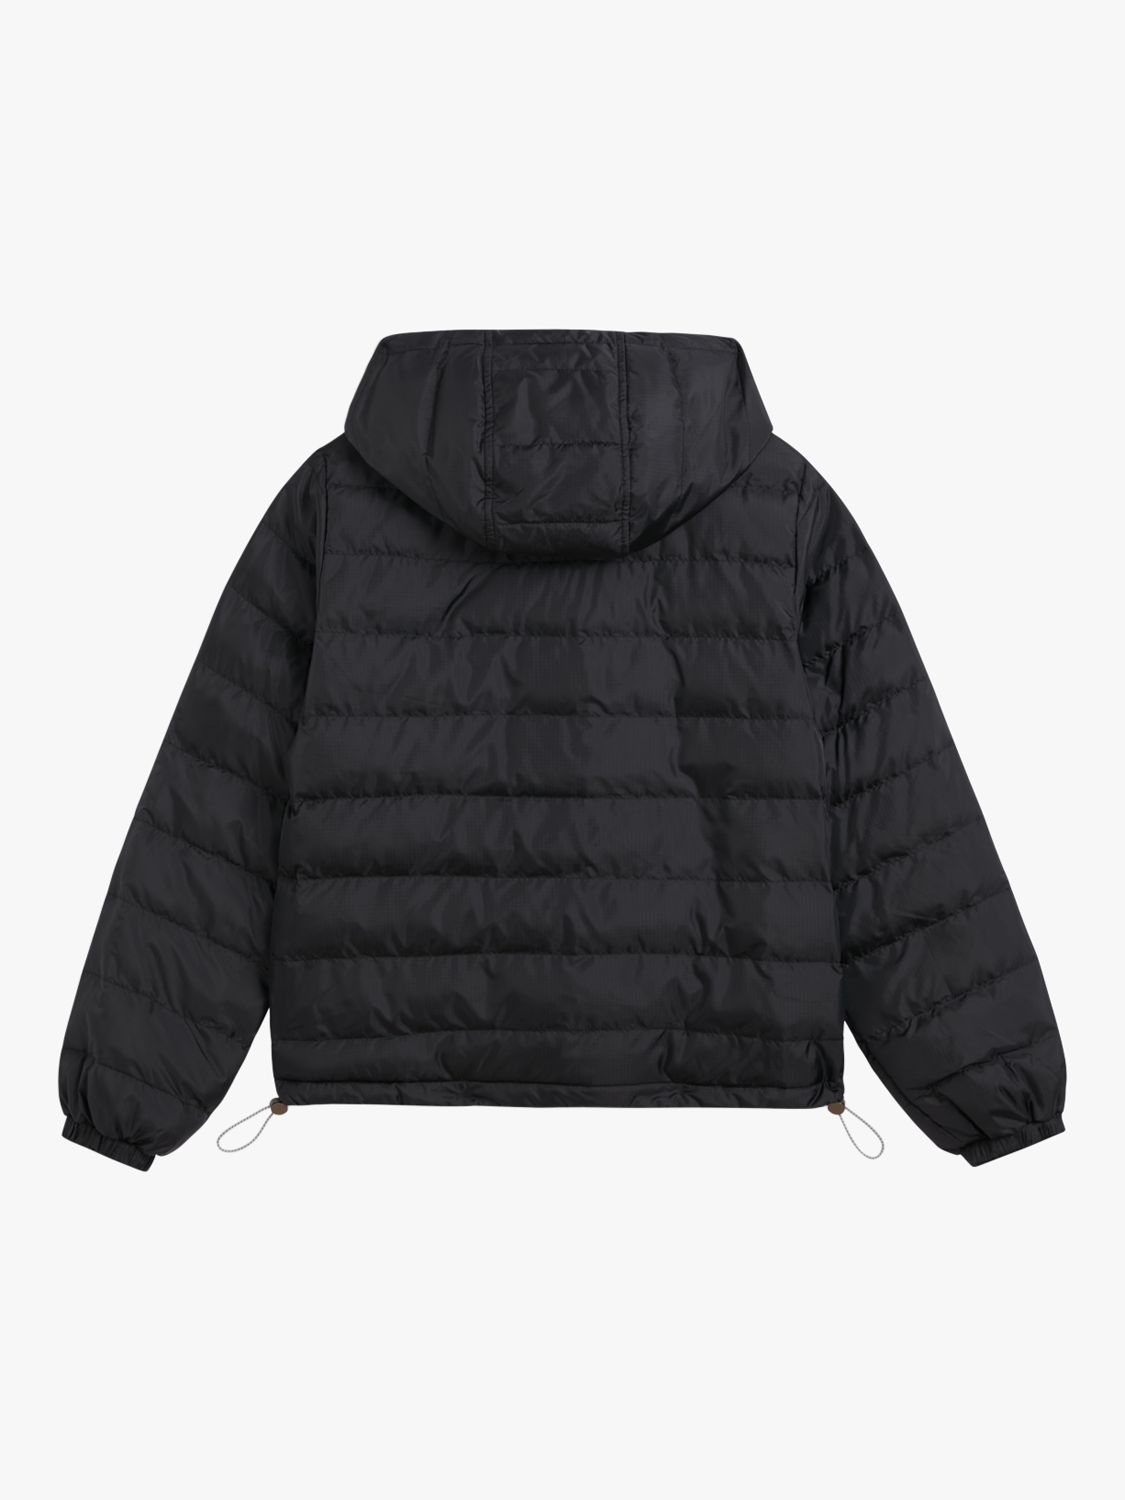 Buy Levi's Edie Packable Quilted Jacket Online at johnlewis.com